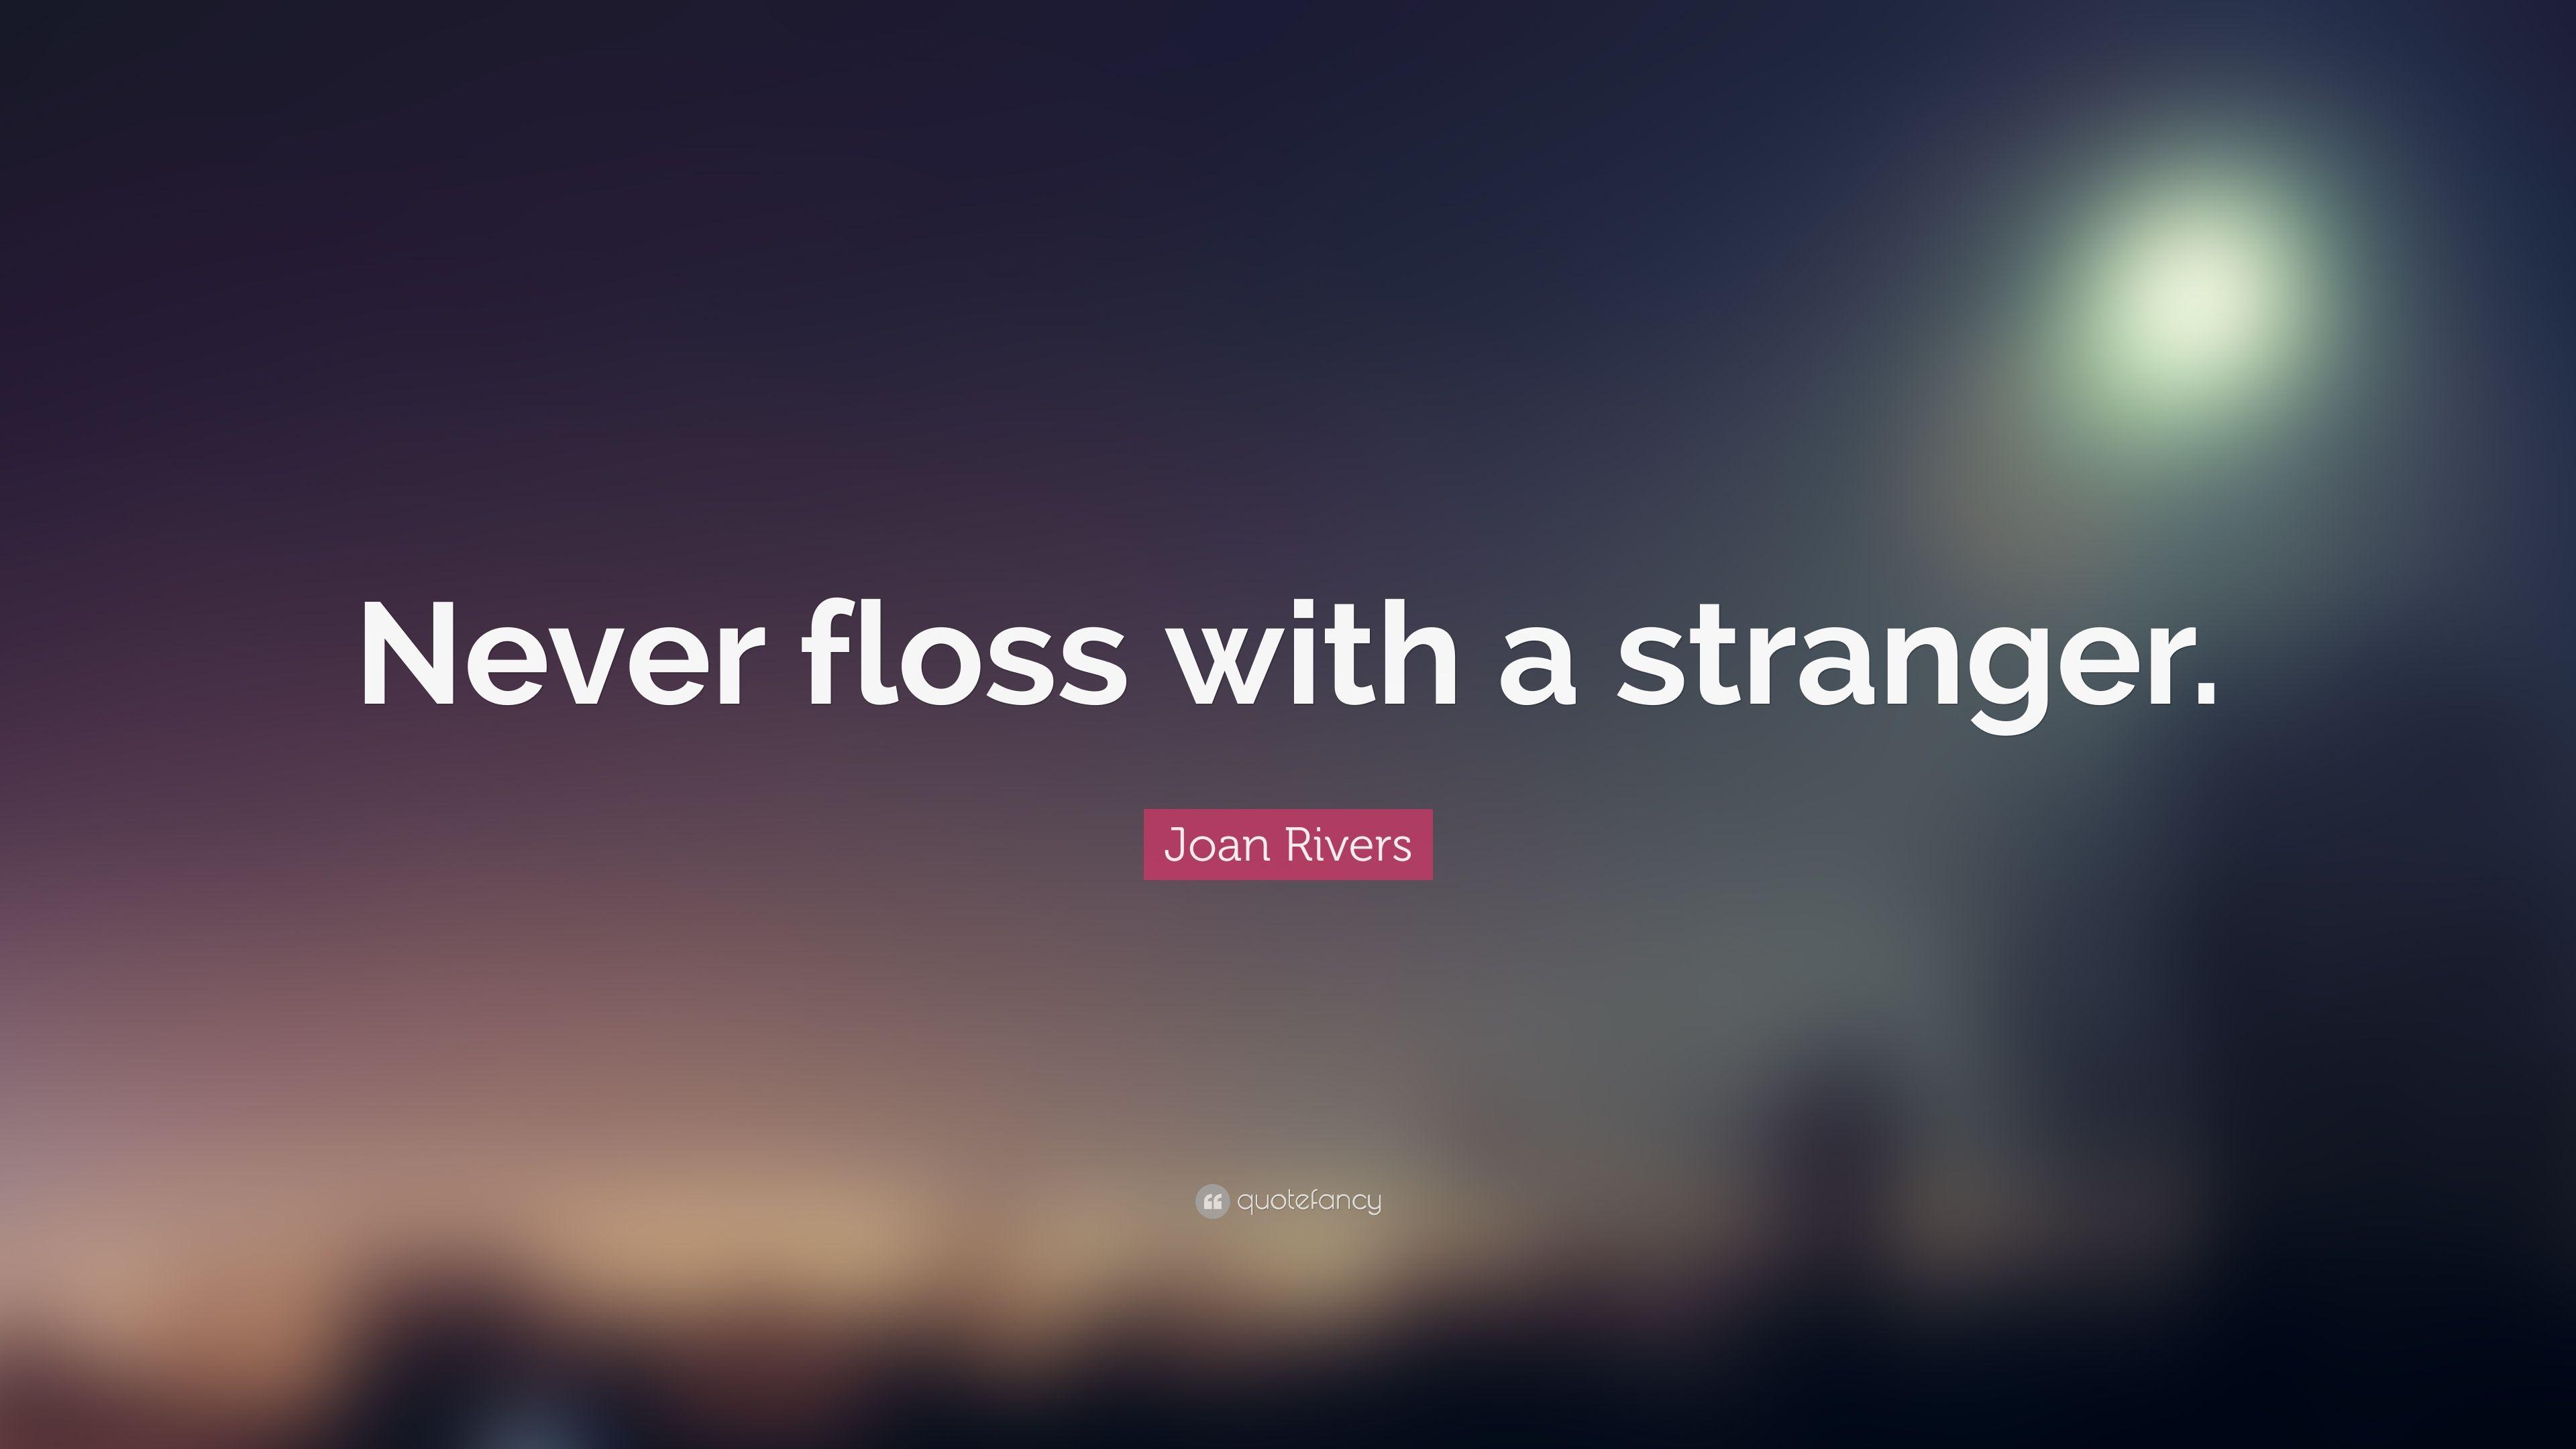 Joan Rivers Quote: “Never floss with a stranger.” 7 wallpaper